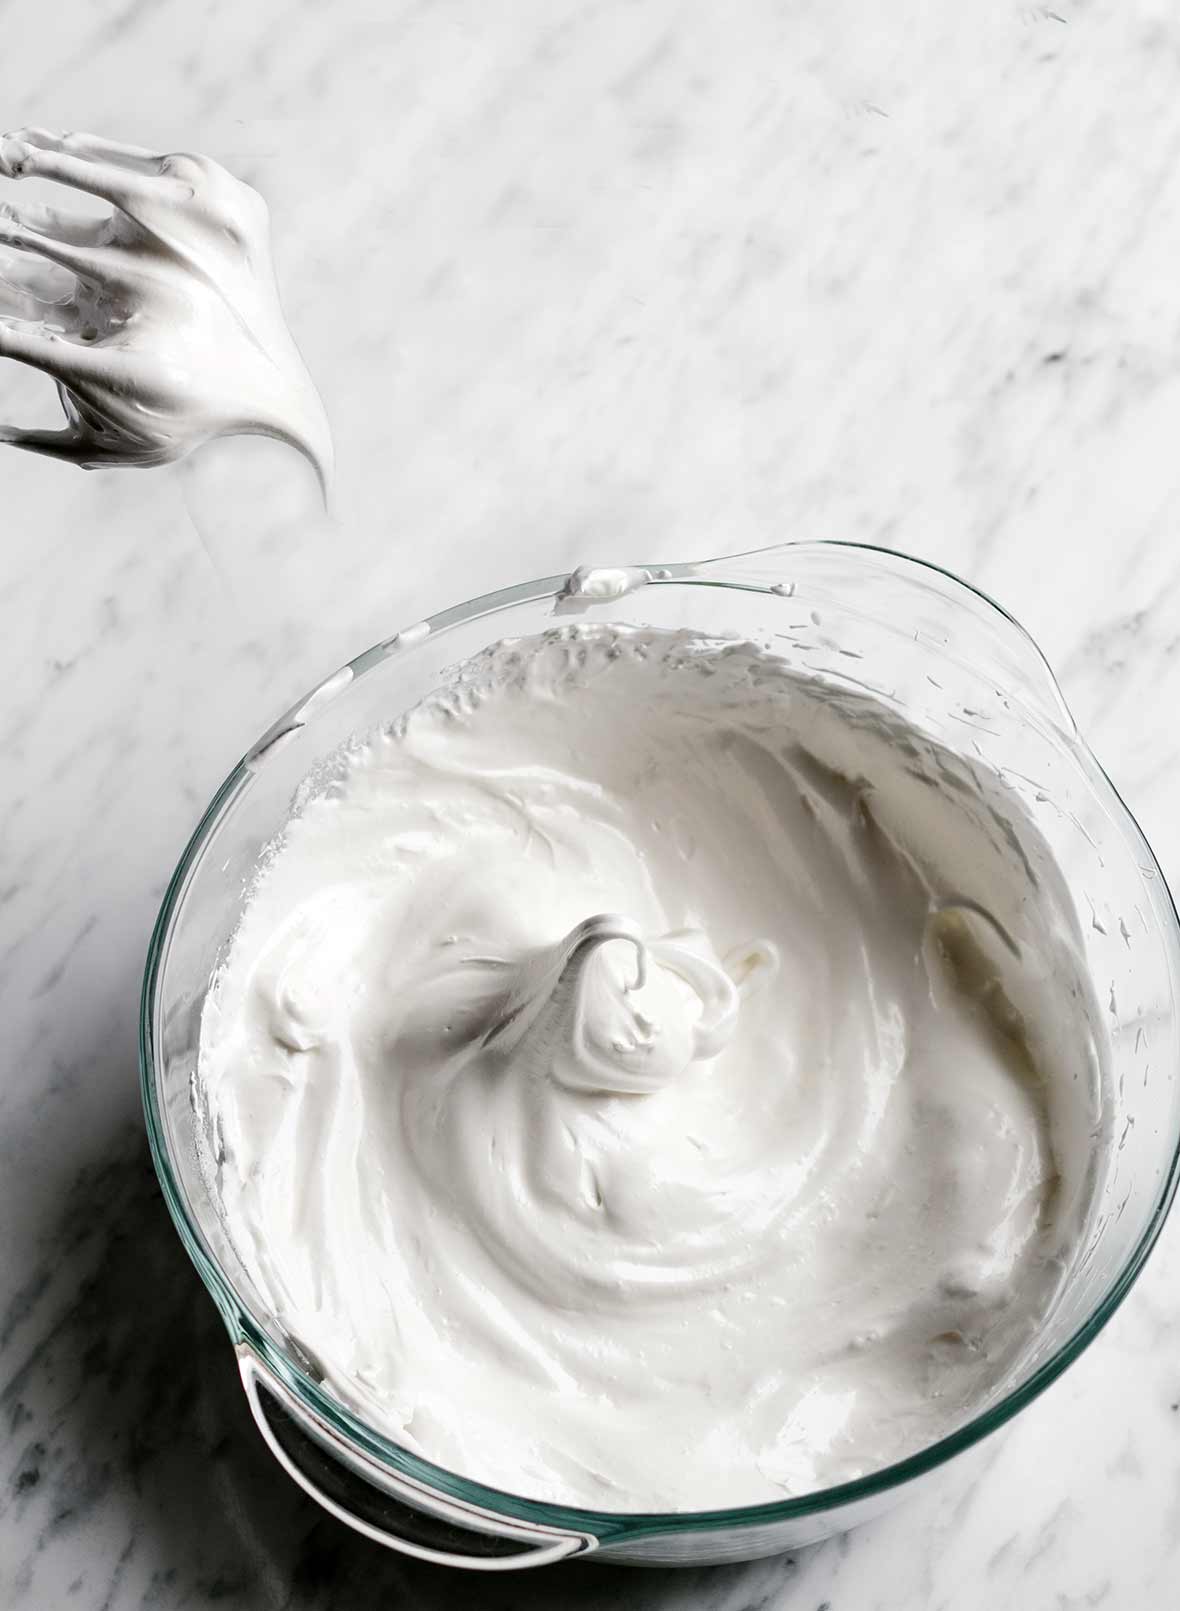 Bowl of angel white icing in firm peaks on white marble, above is a whisk